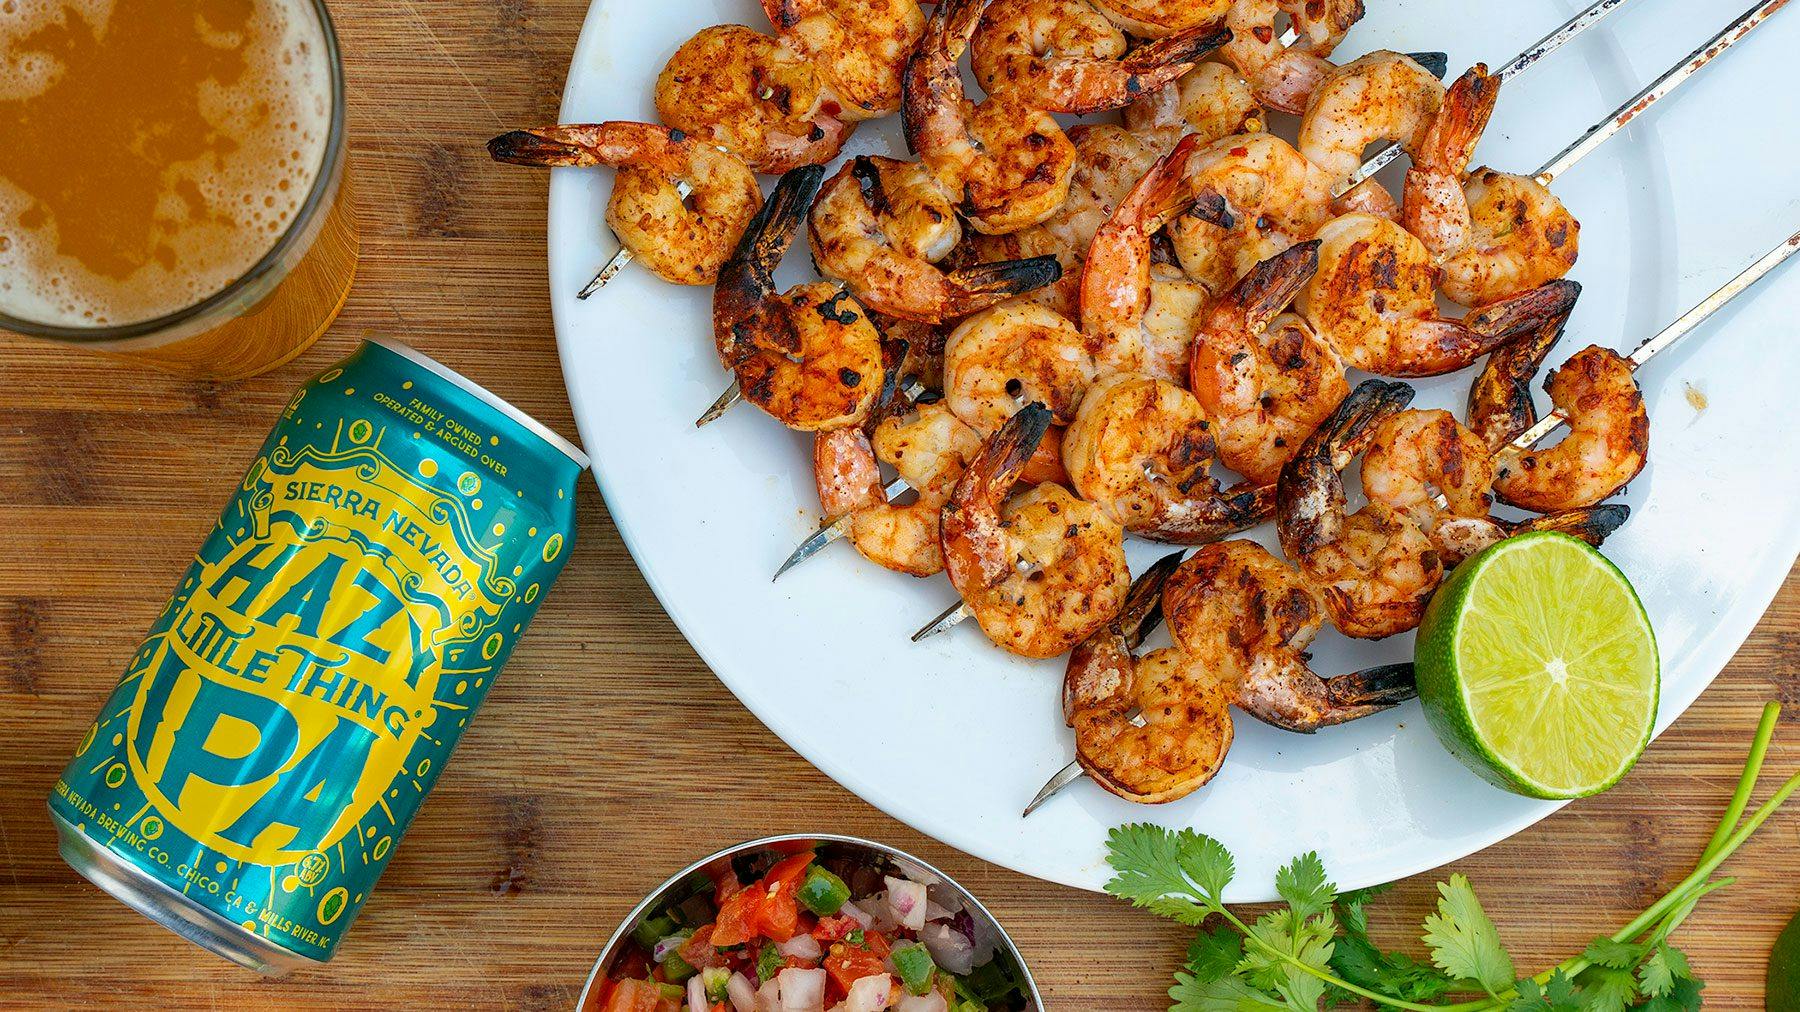 A can of Hazy Little Thing next to grilled shrimp skewers